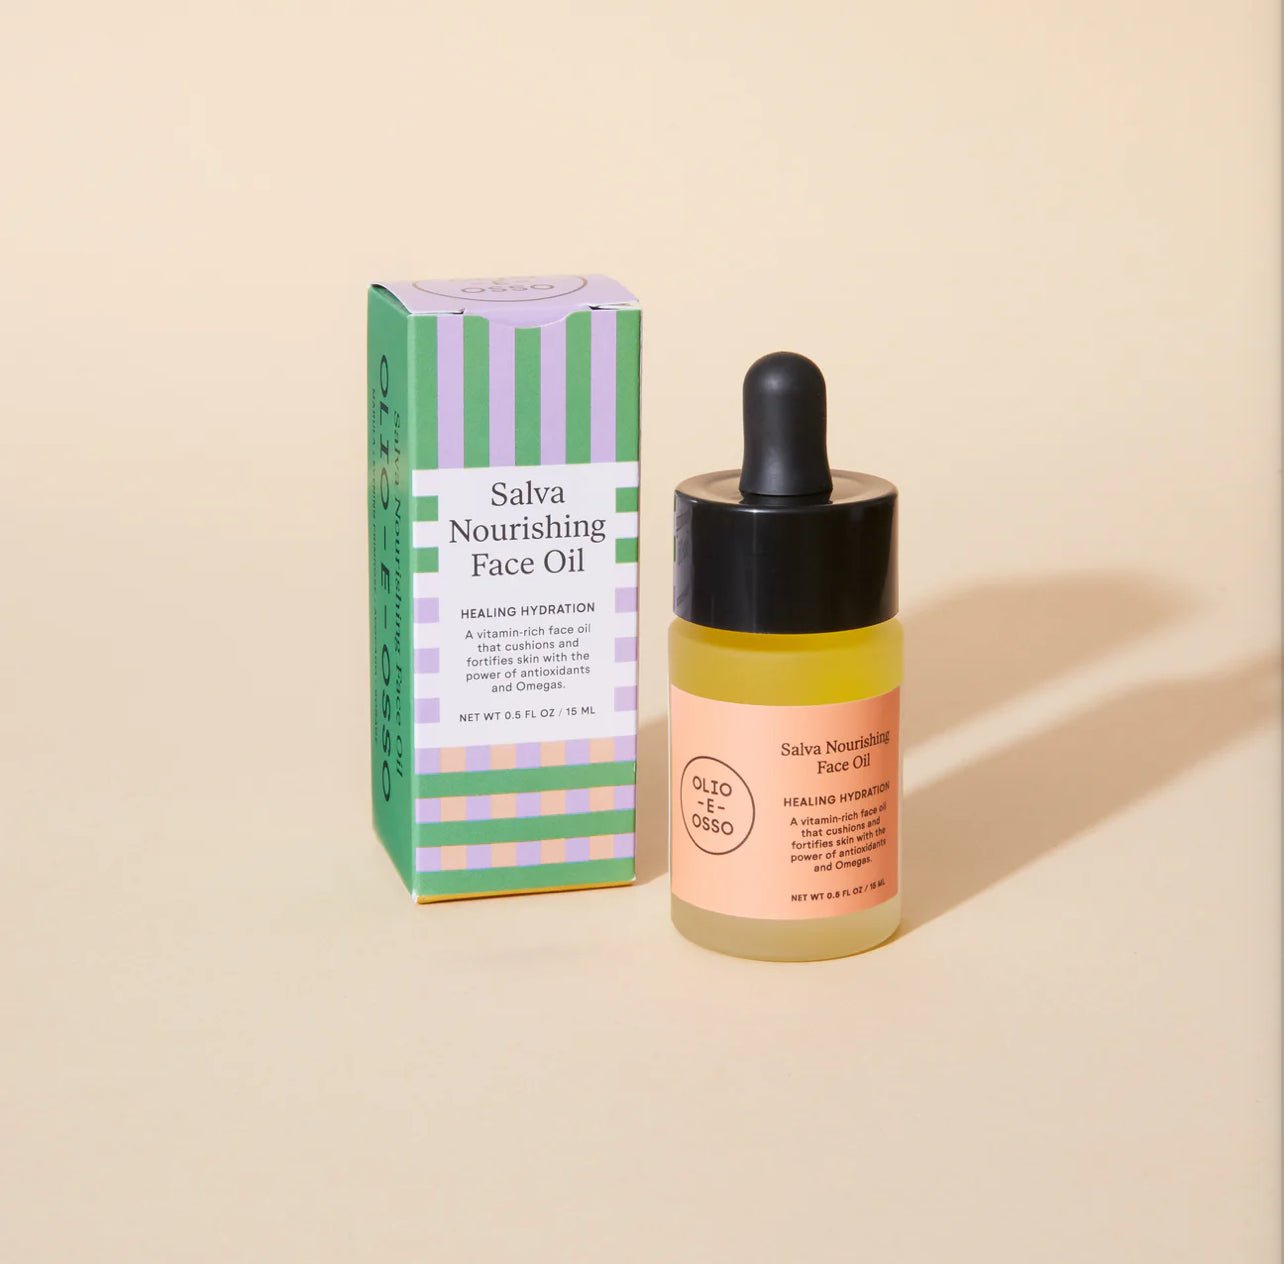 Salva Nourishing Face Oil by Olio E Osso - The Flower Crate